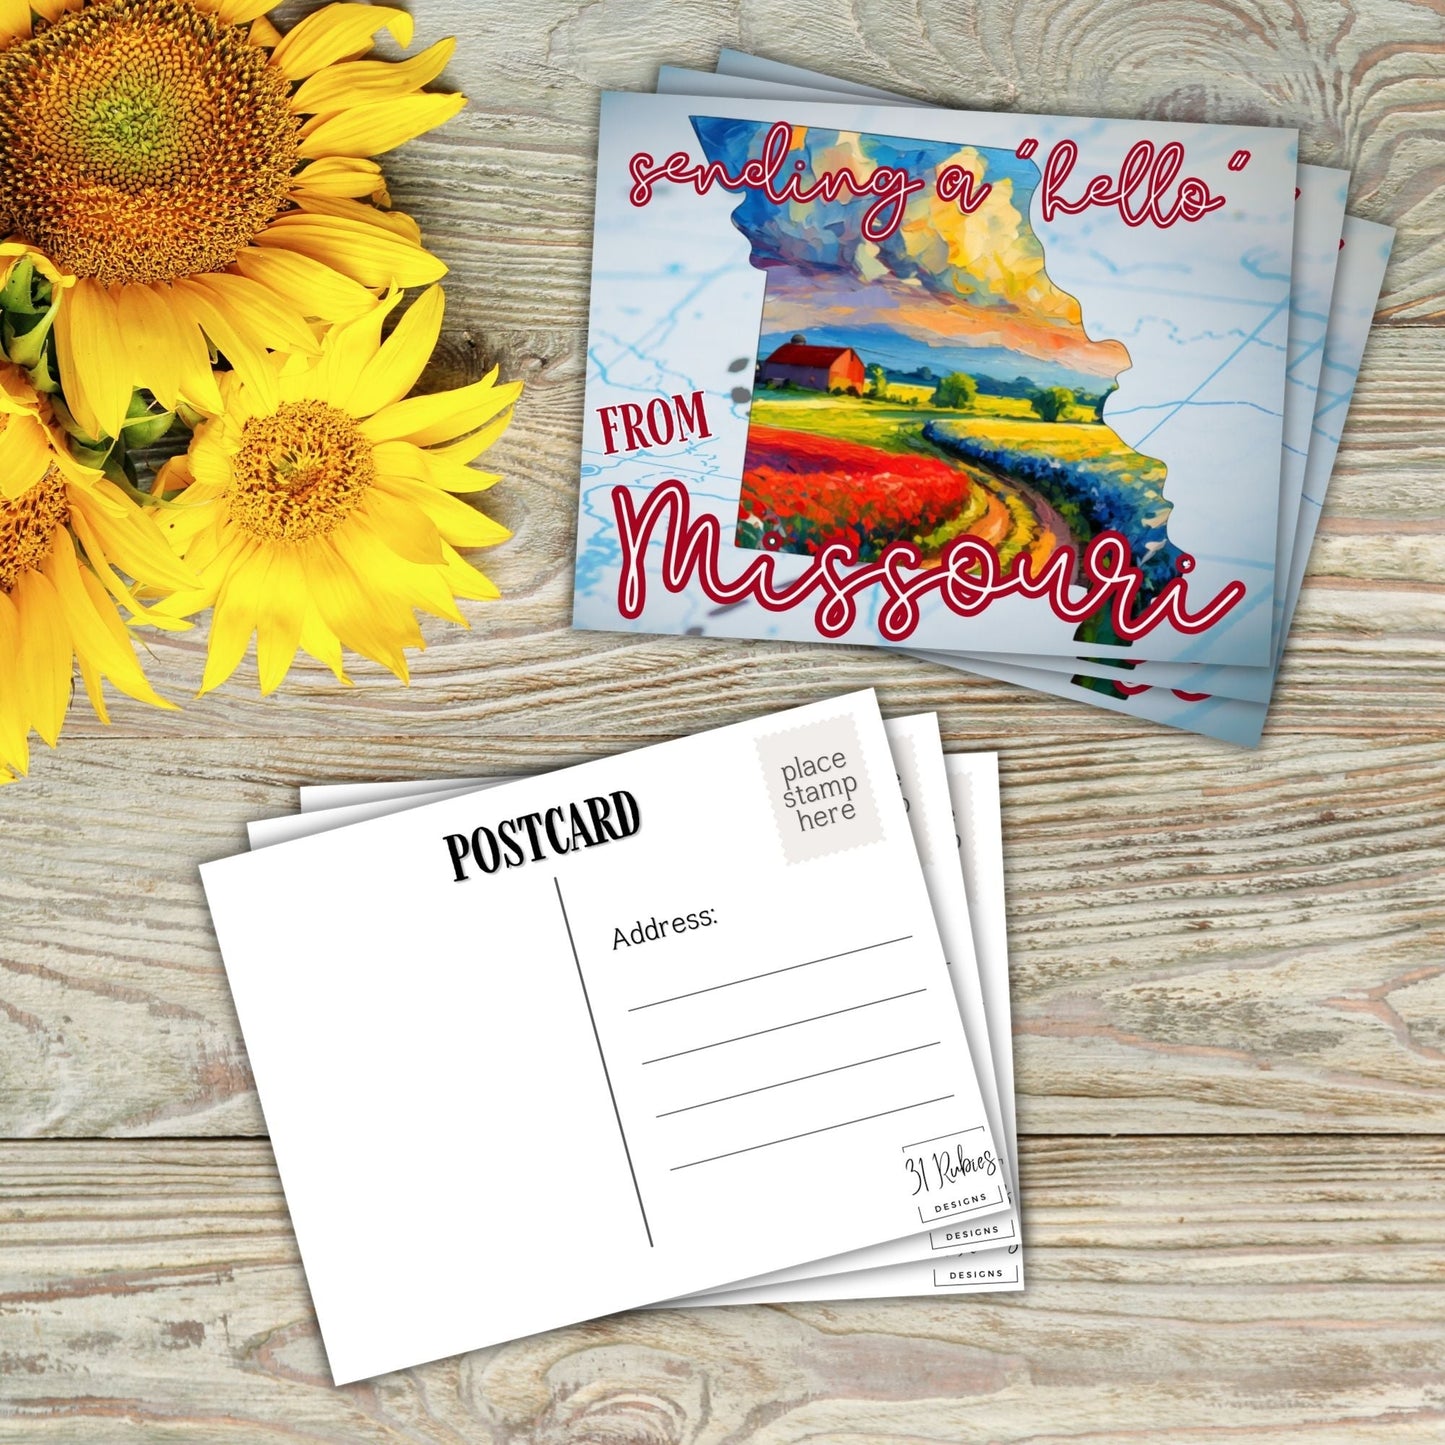 Sending a Hello From... US States! Postcards - 31 Rubies Designs